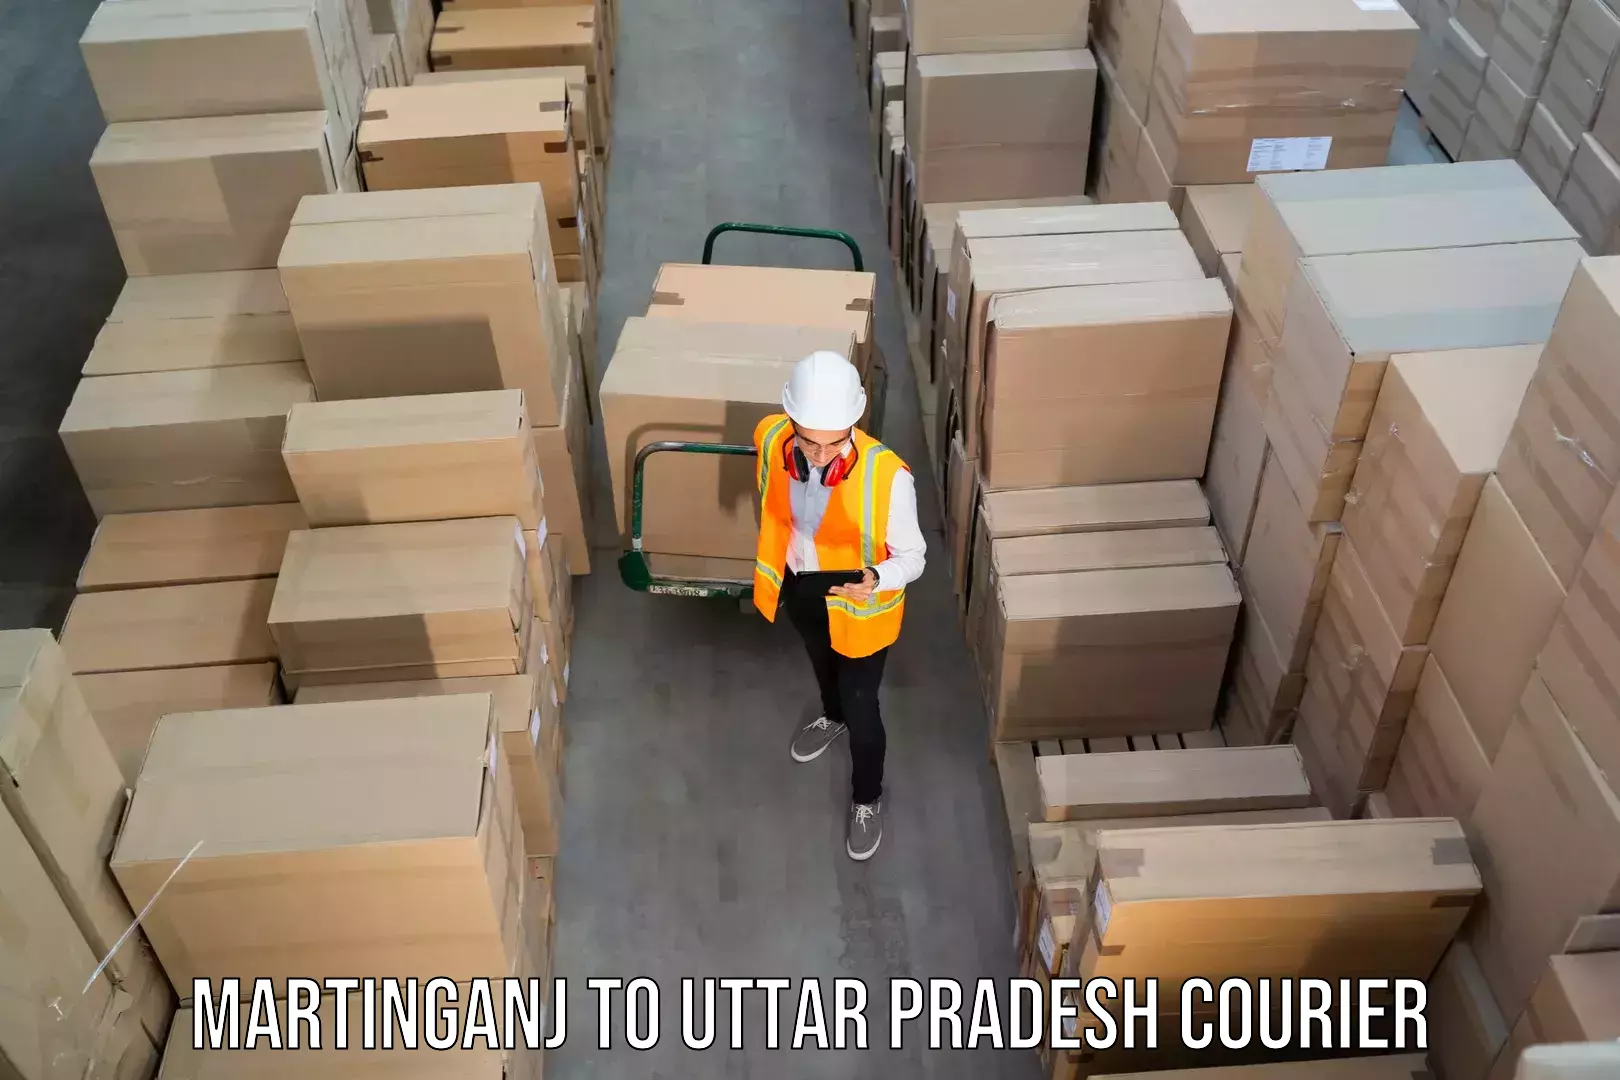 Next-day delivery options Martinganj to Dadri